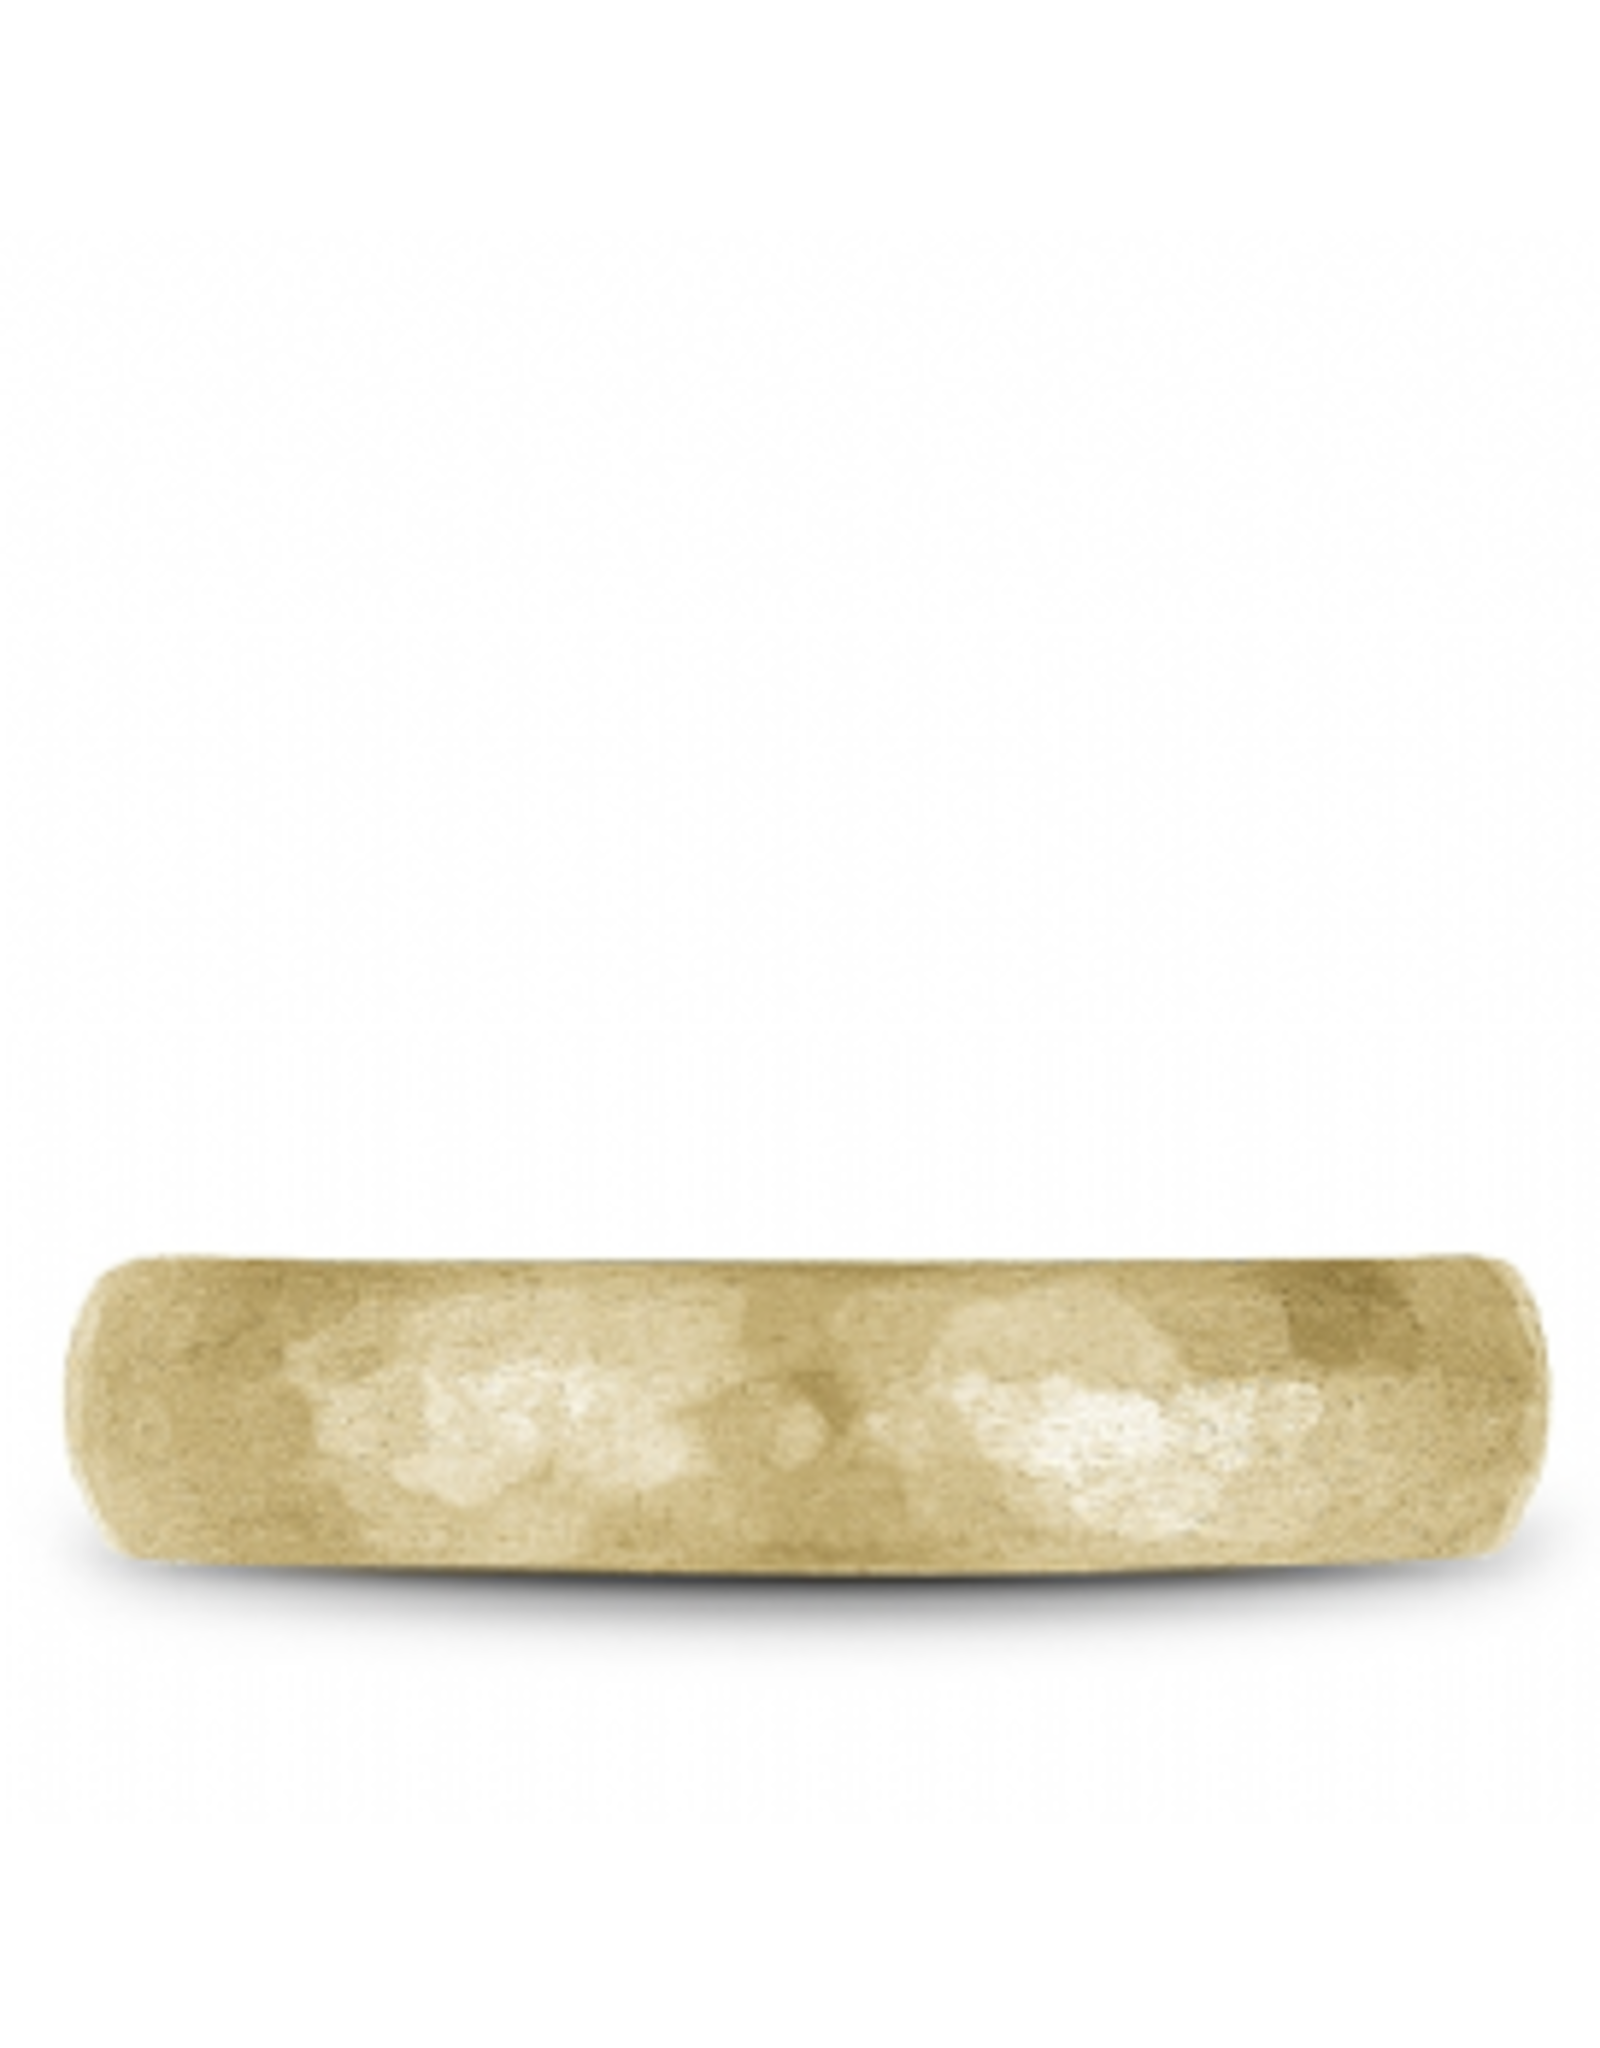 14K Yellow Gold Hammered Band - 5mm